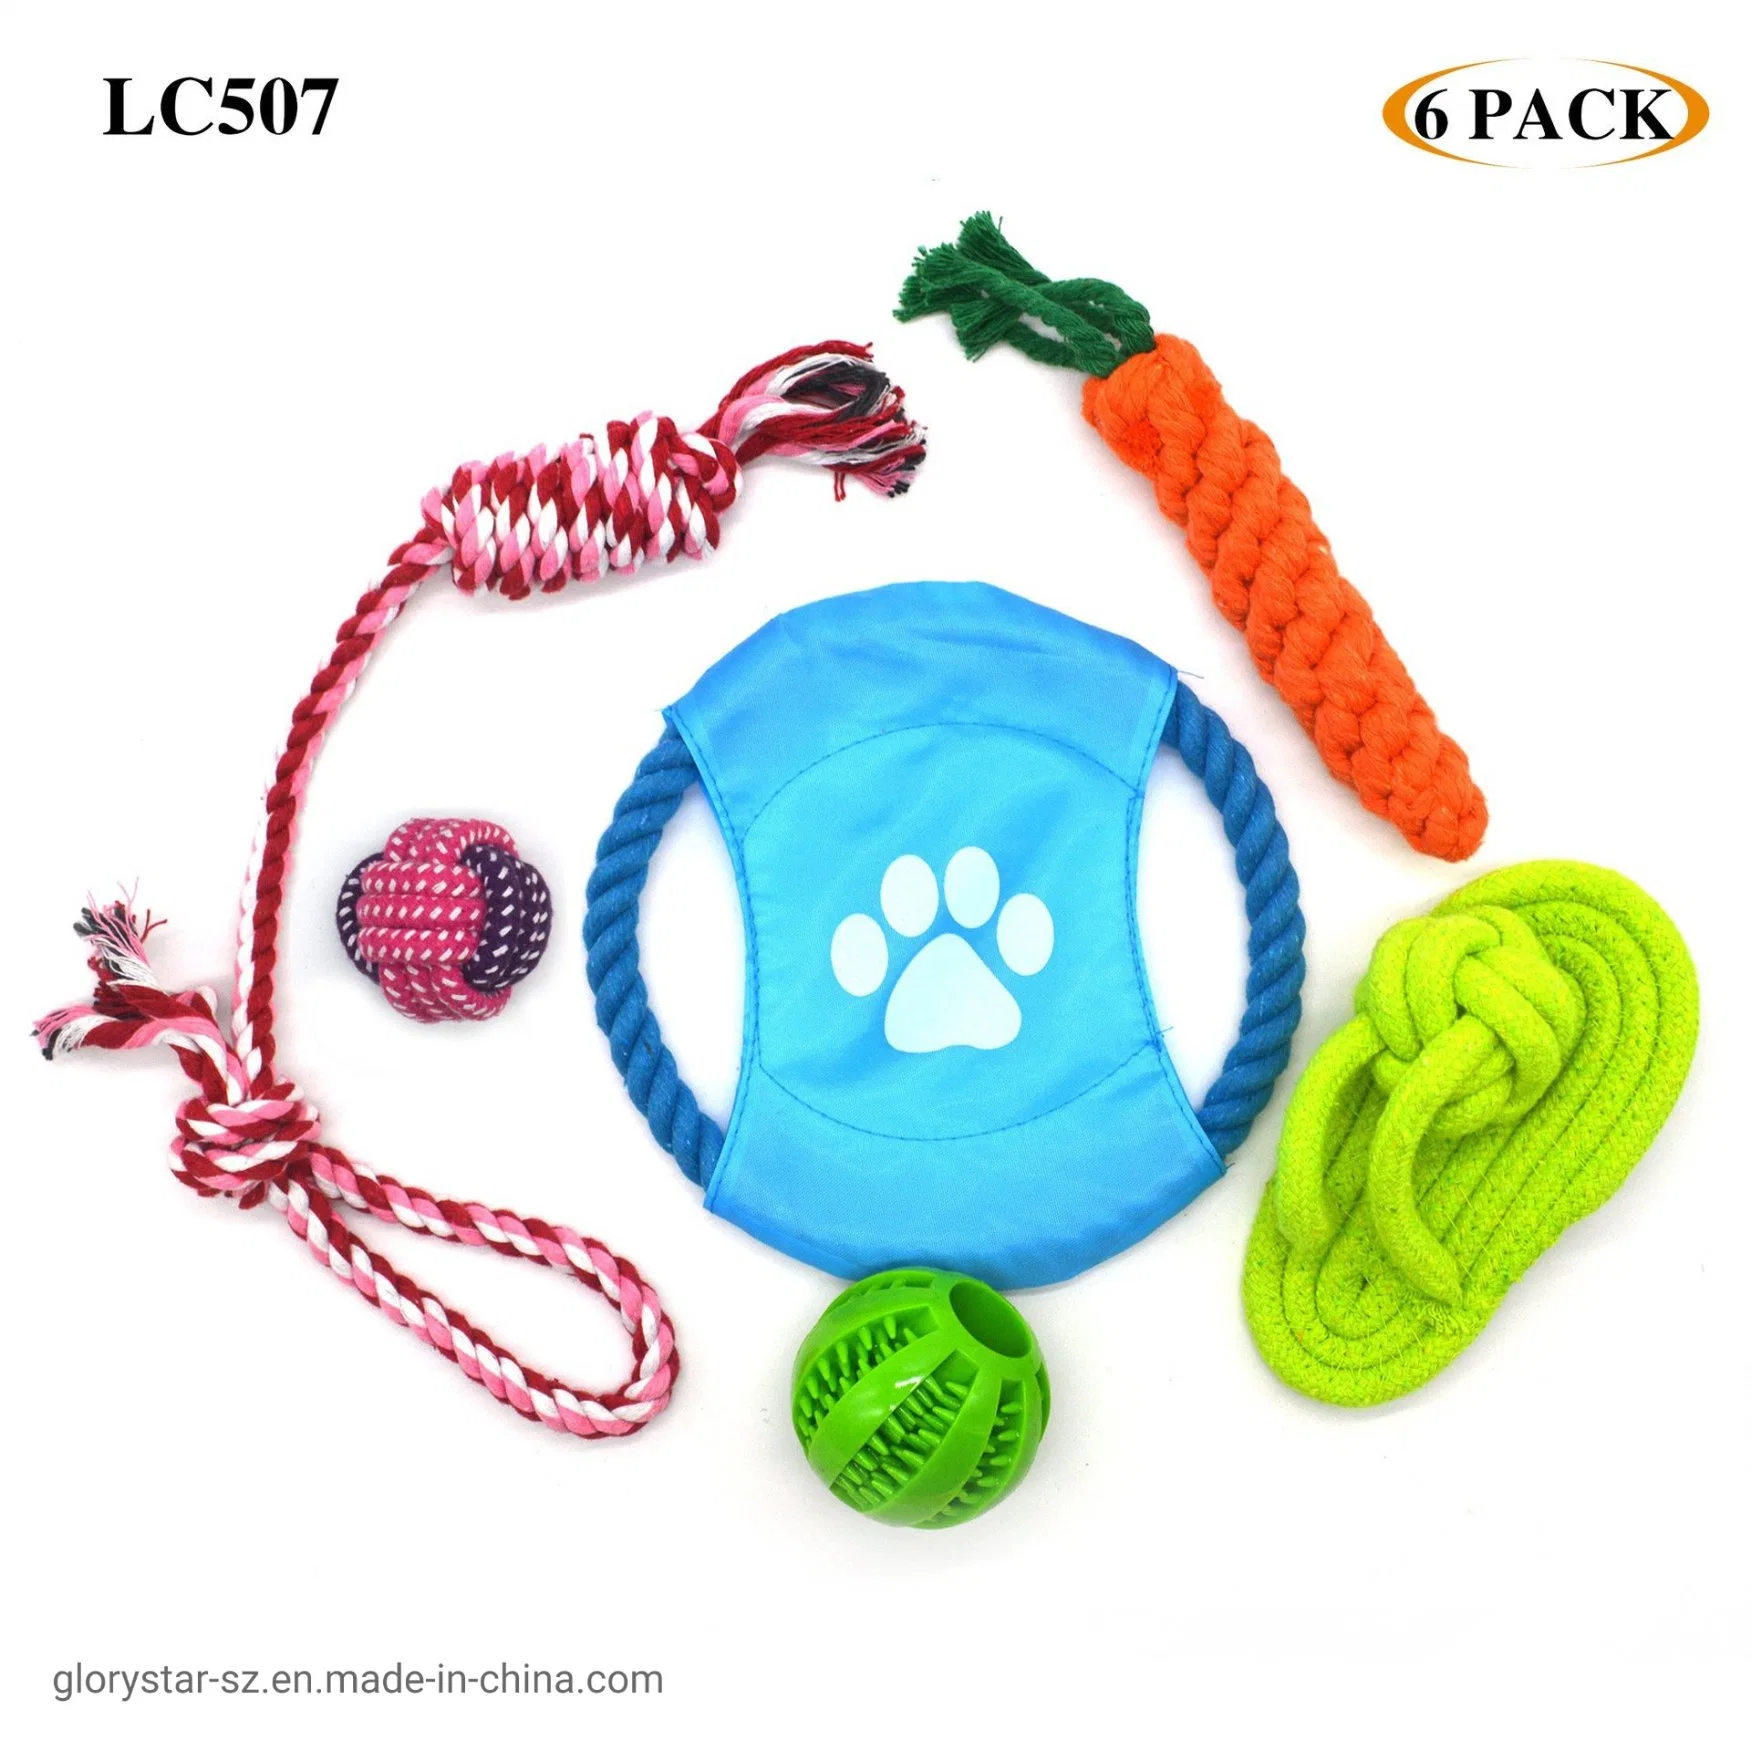 Puppy and Small Dog Pet Teething Squeaky Chew Toys Pack